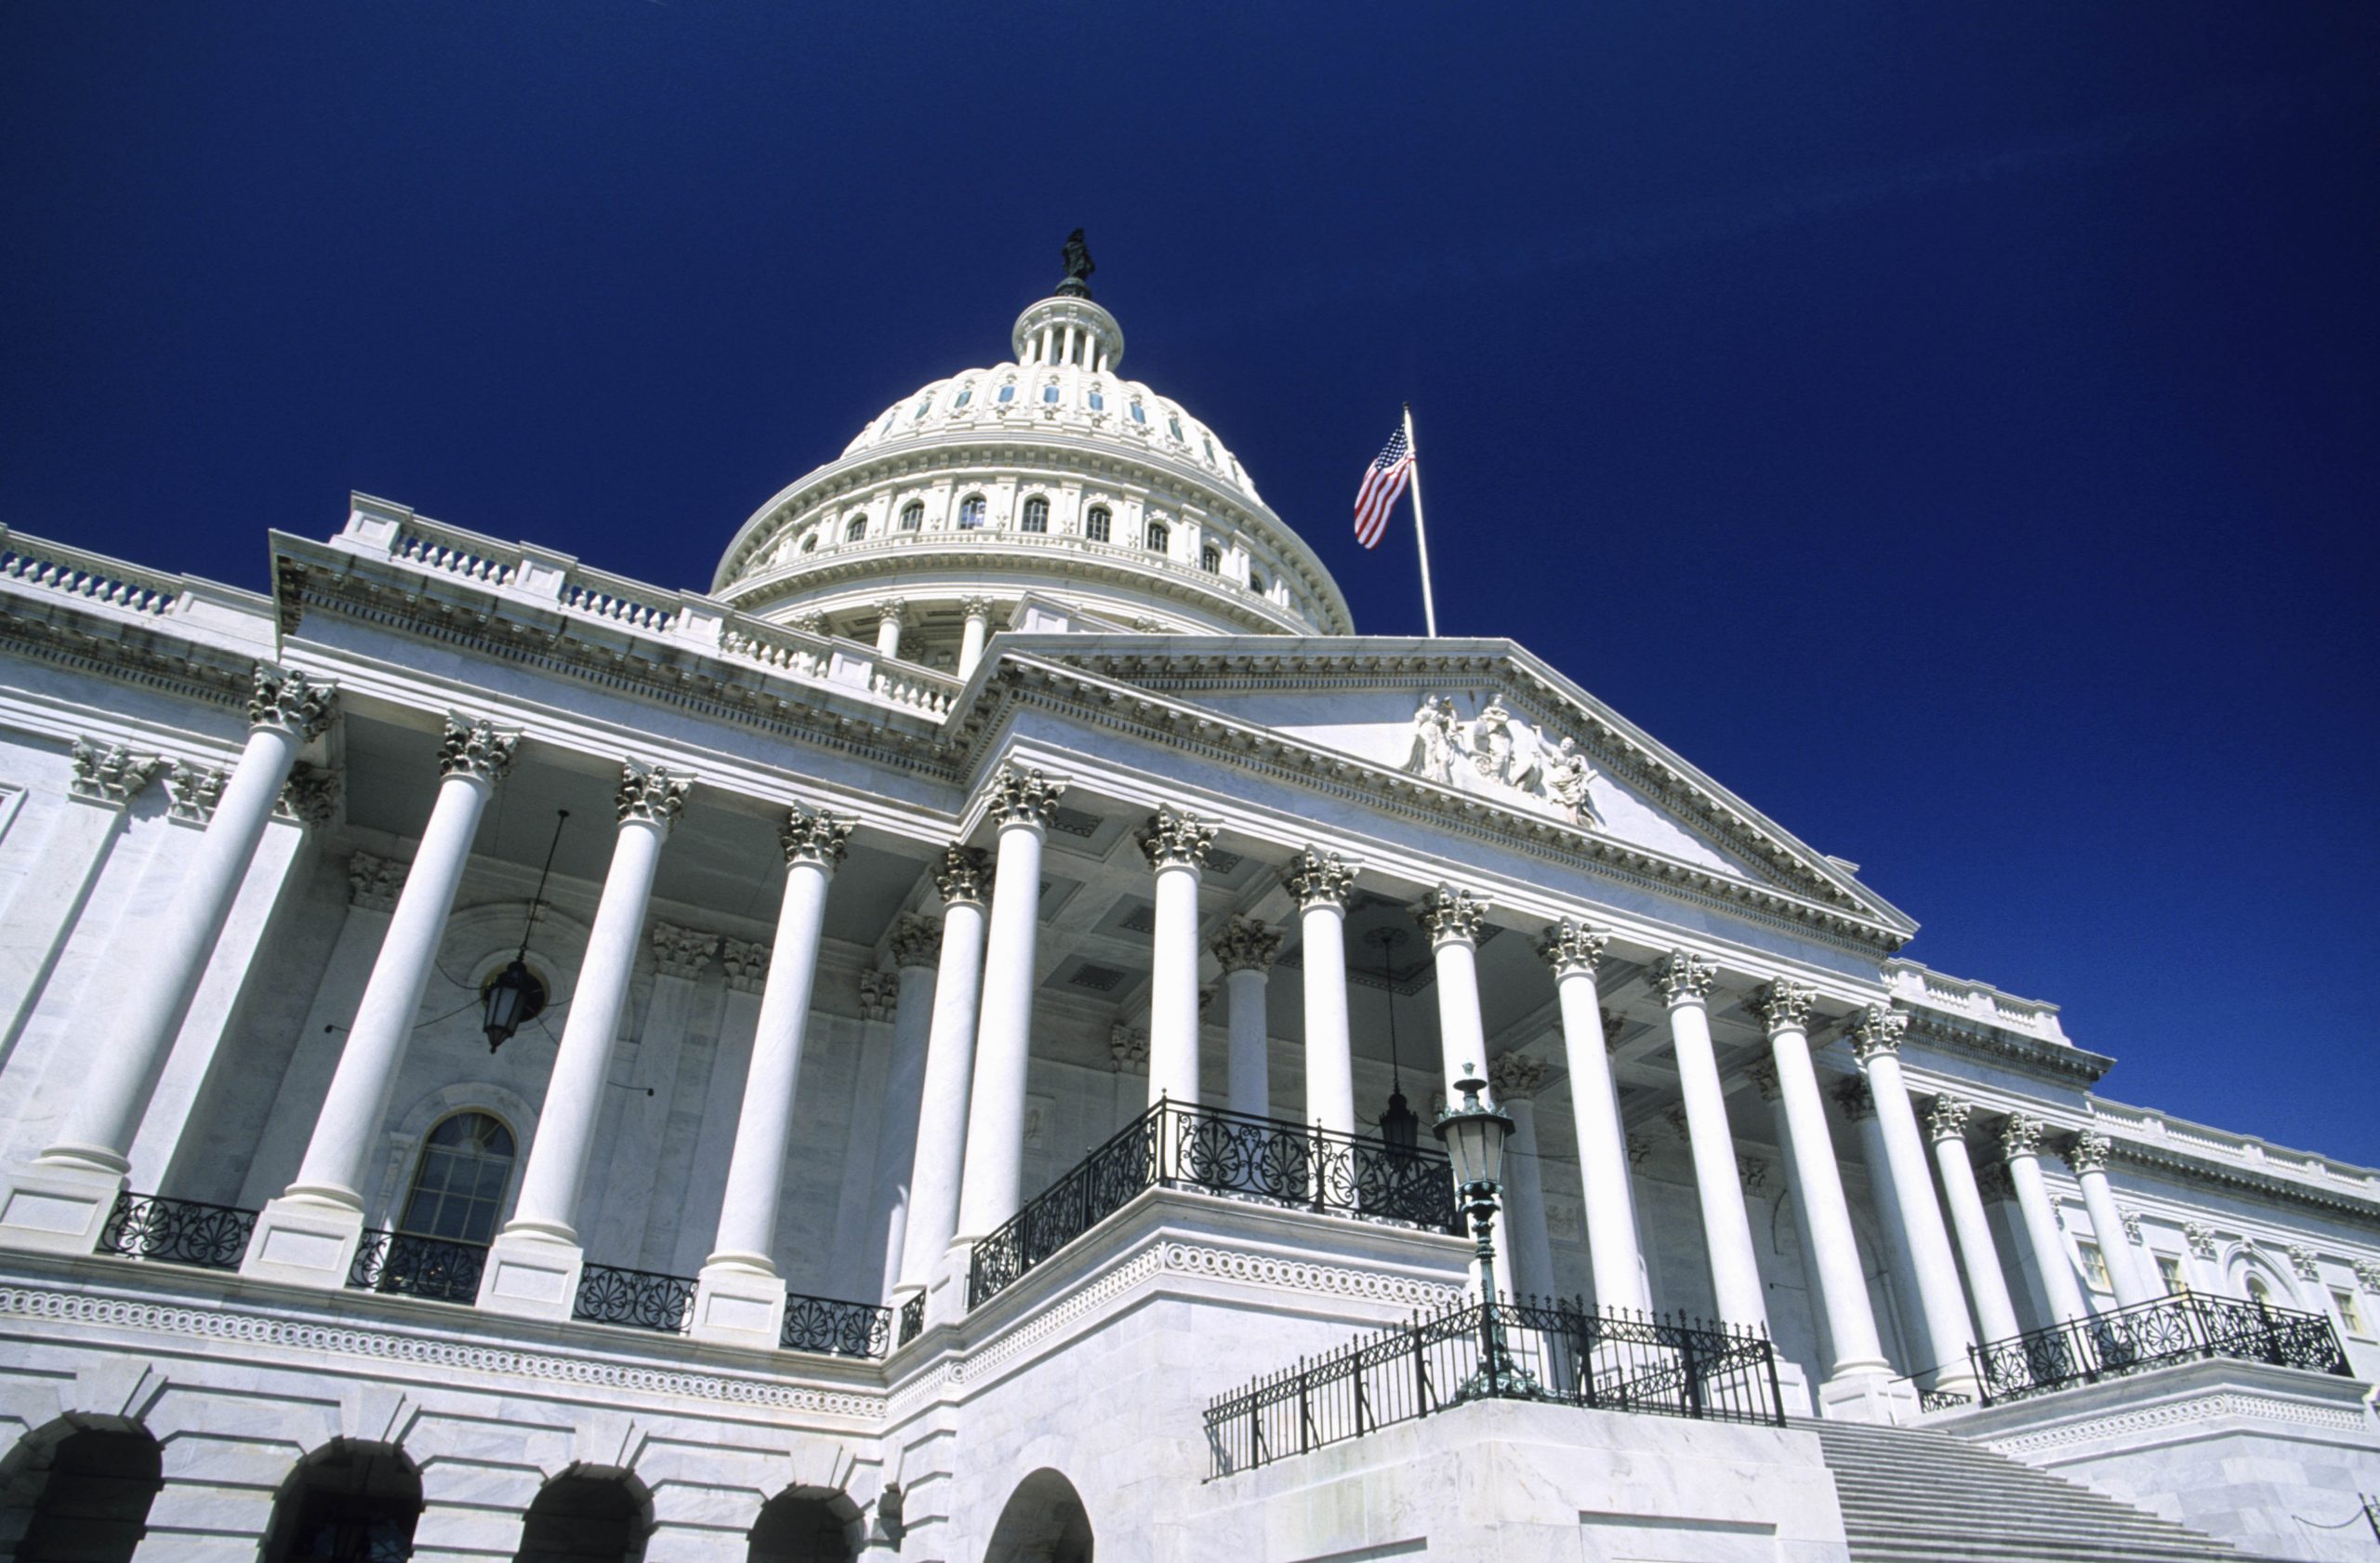 Stock image of the Capitol building